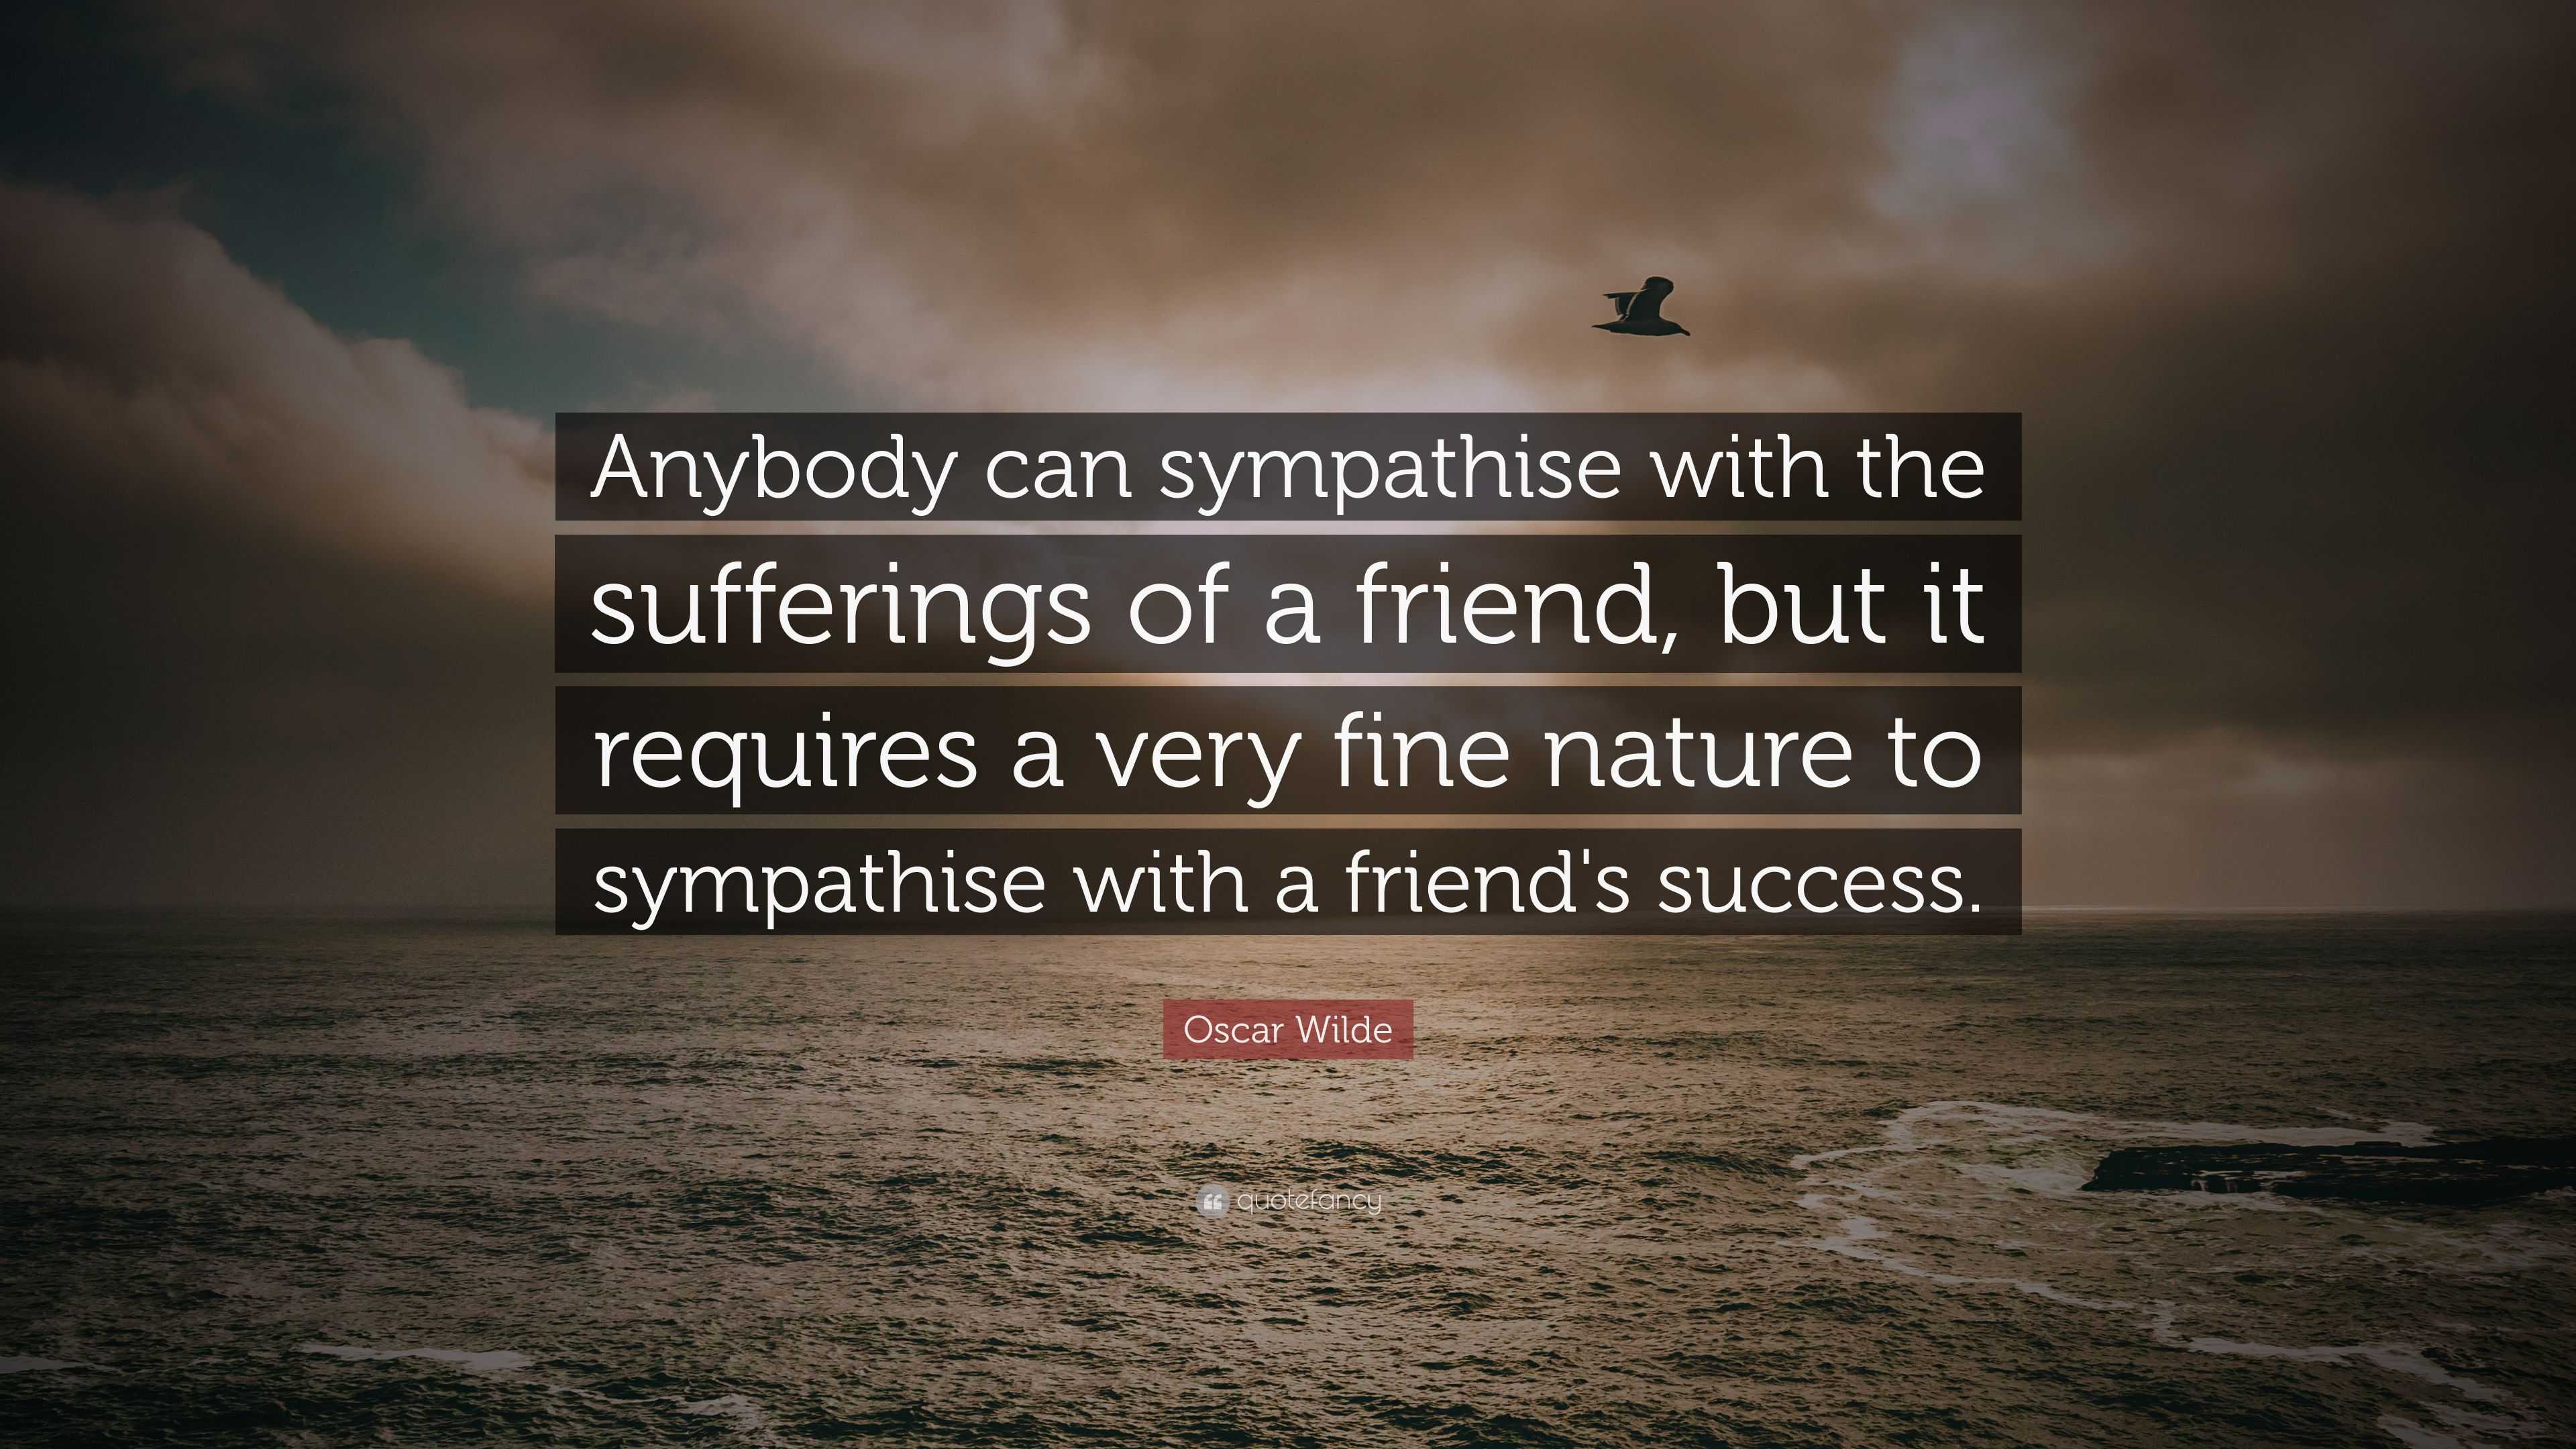 Oscar Wilde Quote: “Anybody can sympathise with the sufferings of a